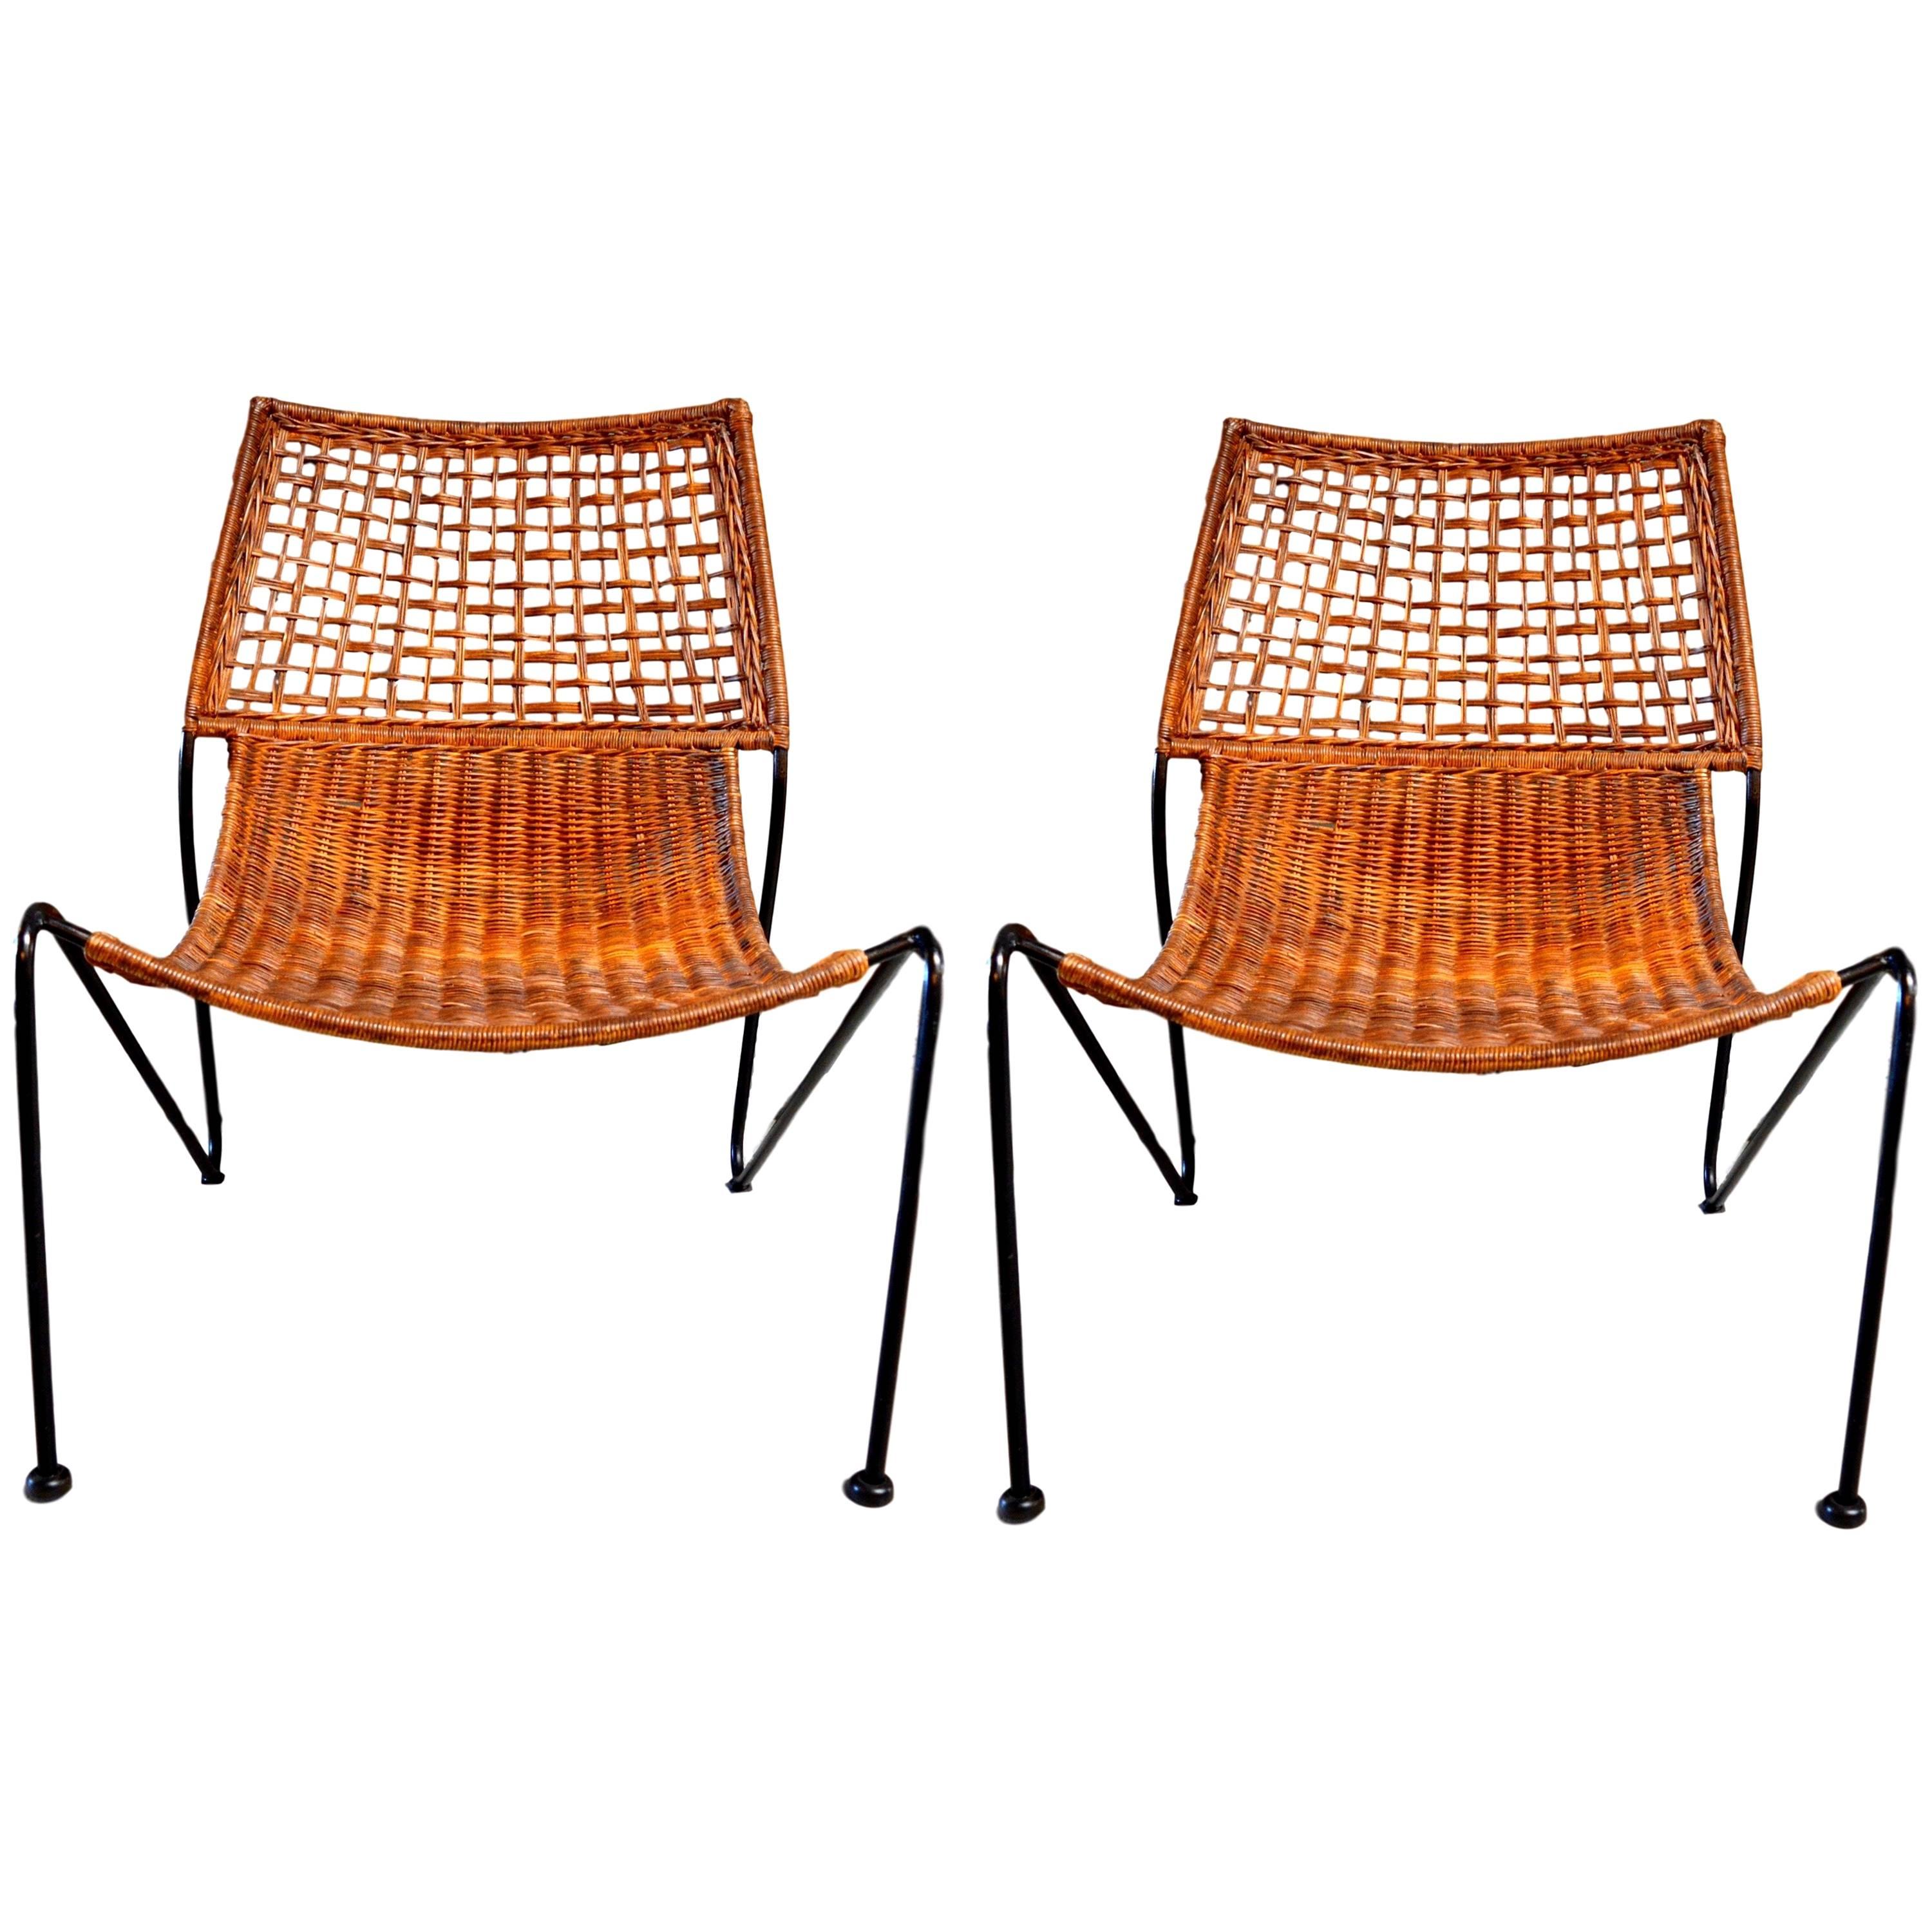 Sculptural Iron and Wicker Chairs in the style of Tempestini